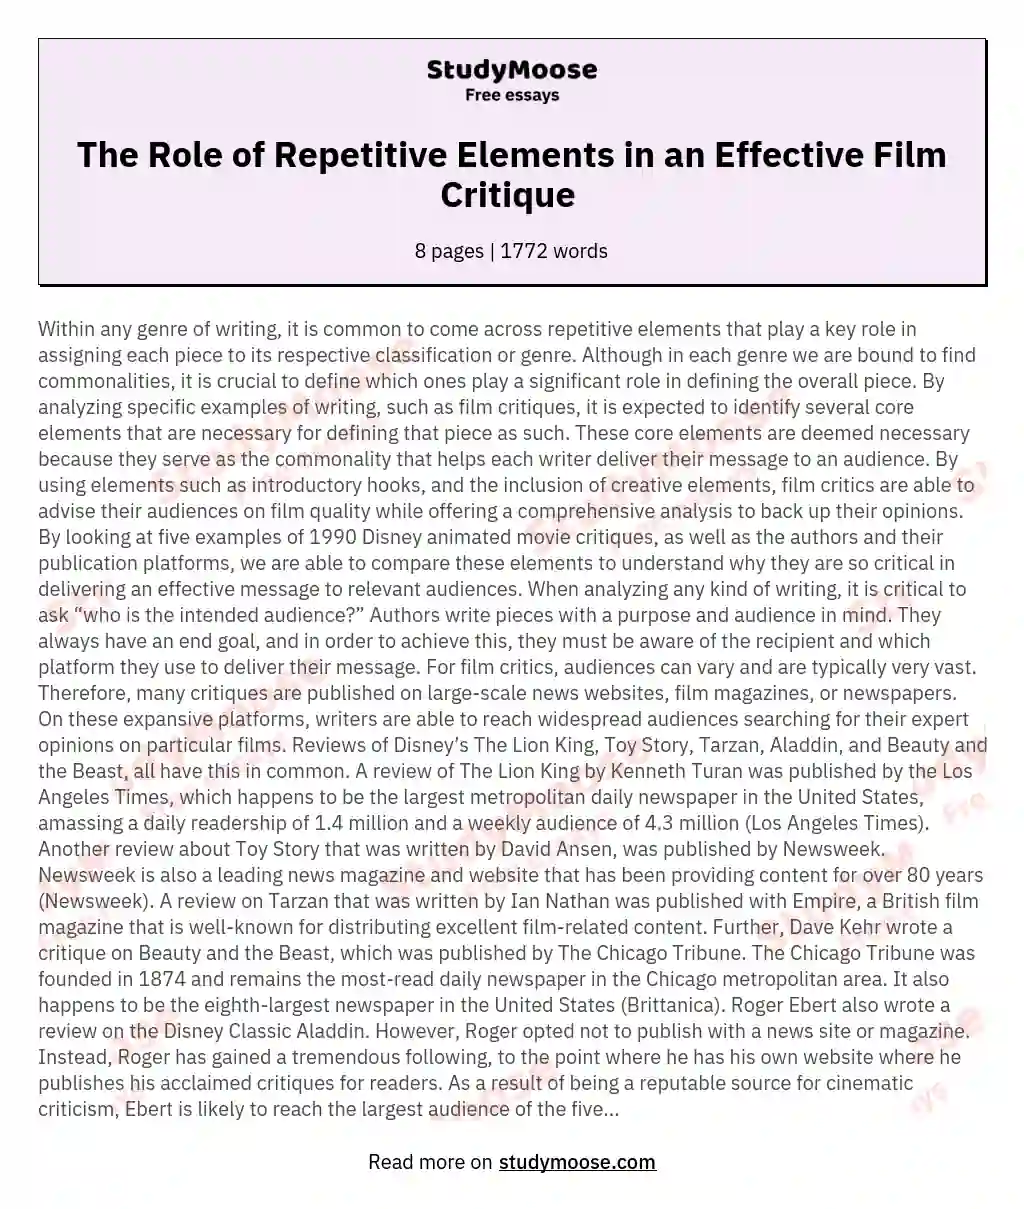 The Role of Repetitive Elements in an Effective Film Critique  essay